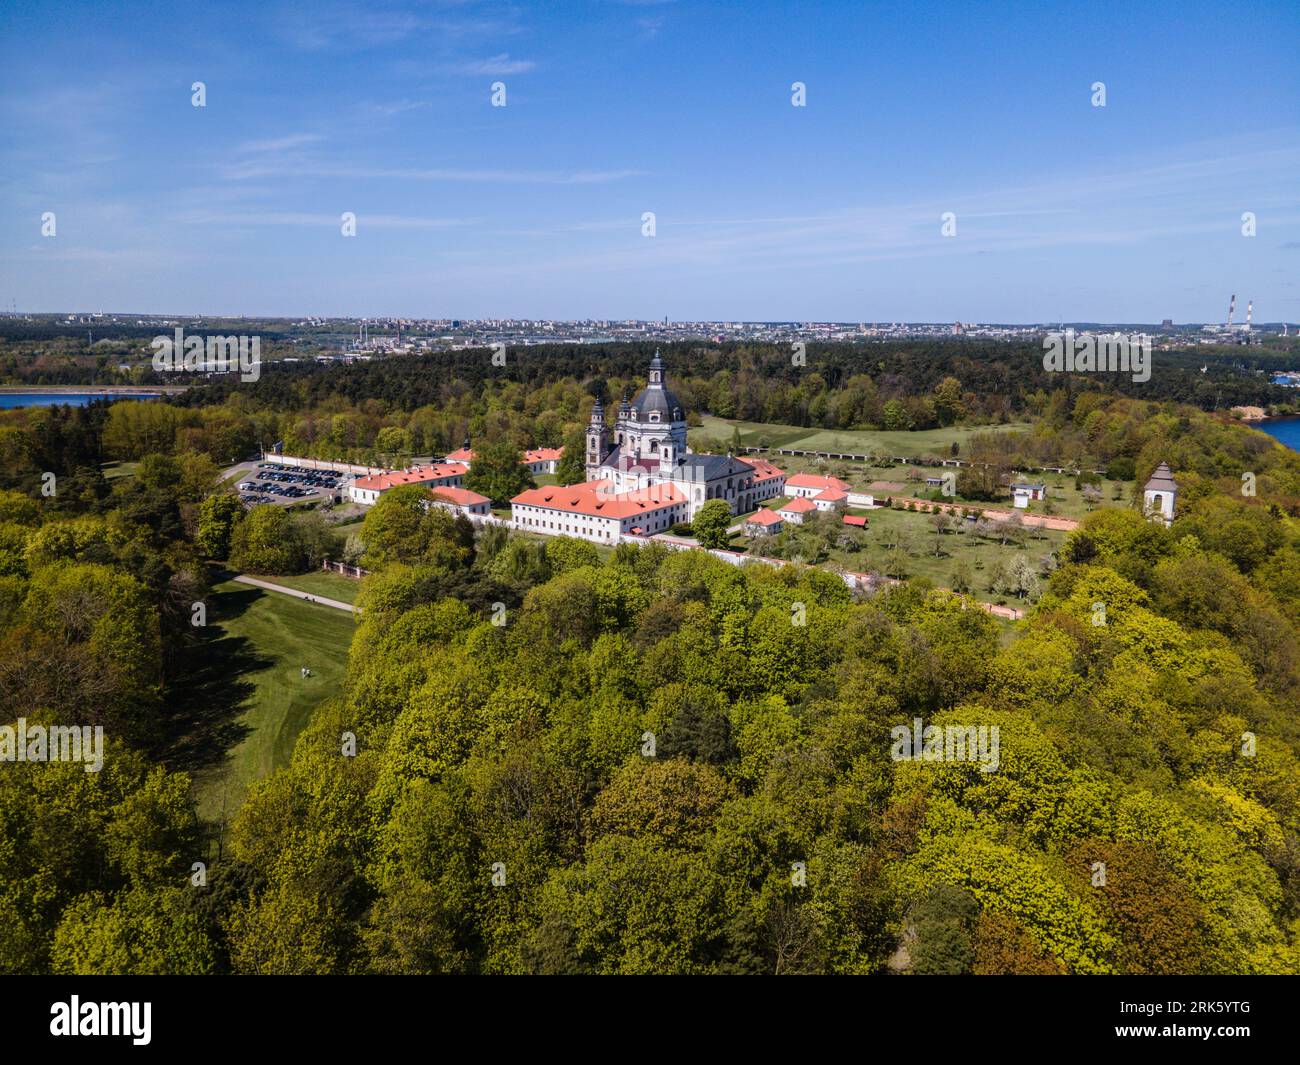 Aerial view of the stunning Pazaislis monastery in Kaunas, Lithuania, featuring a large church, multiple buildings and a lake Stock Photo